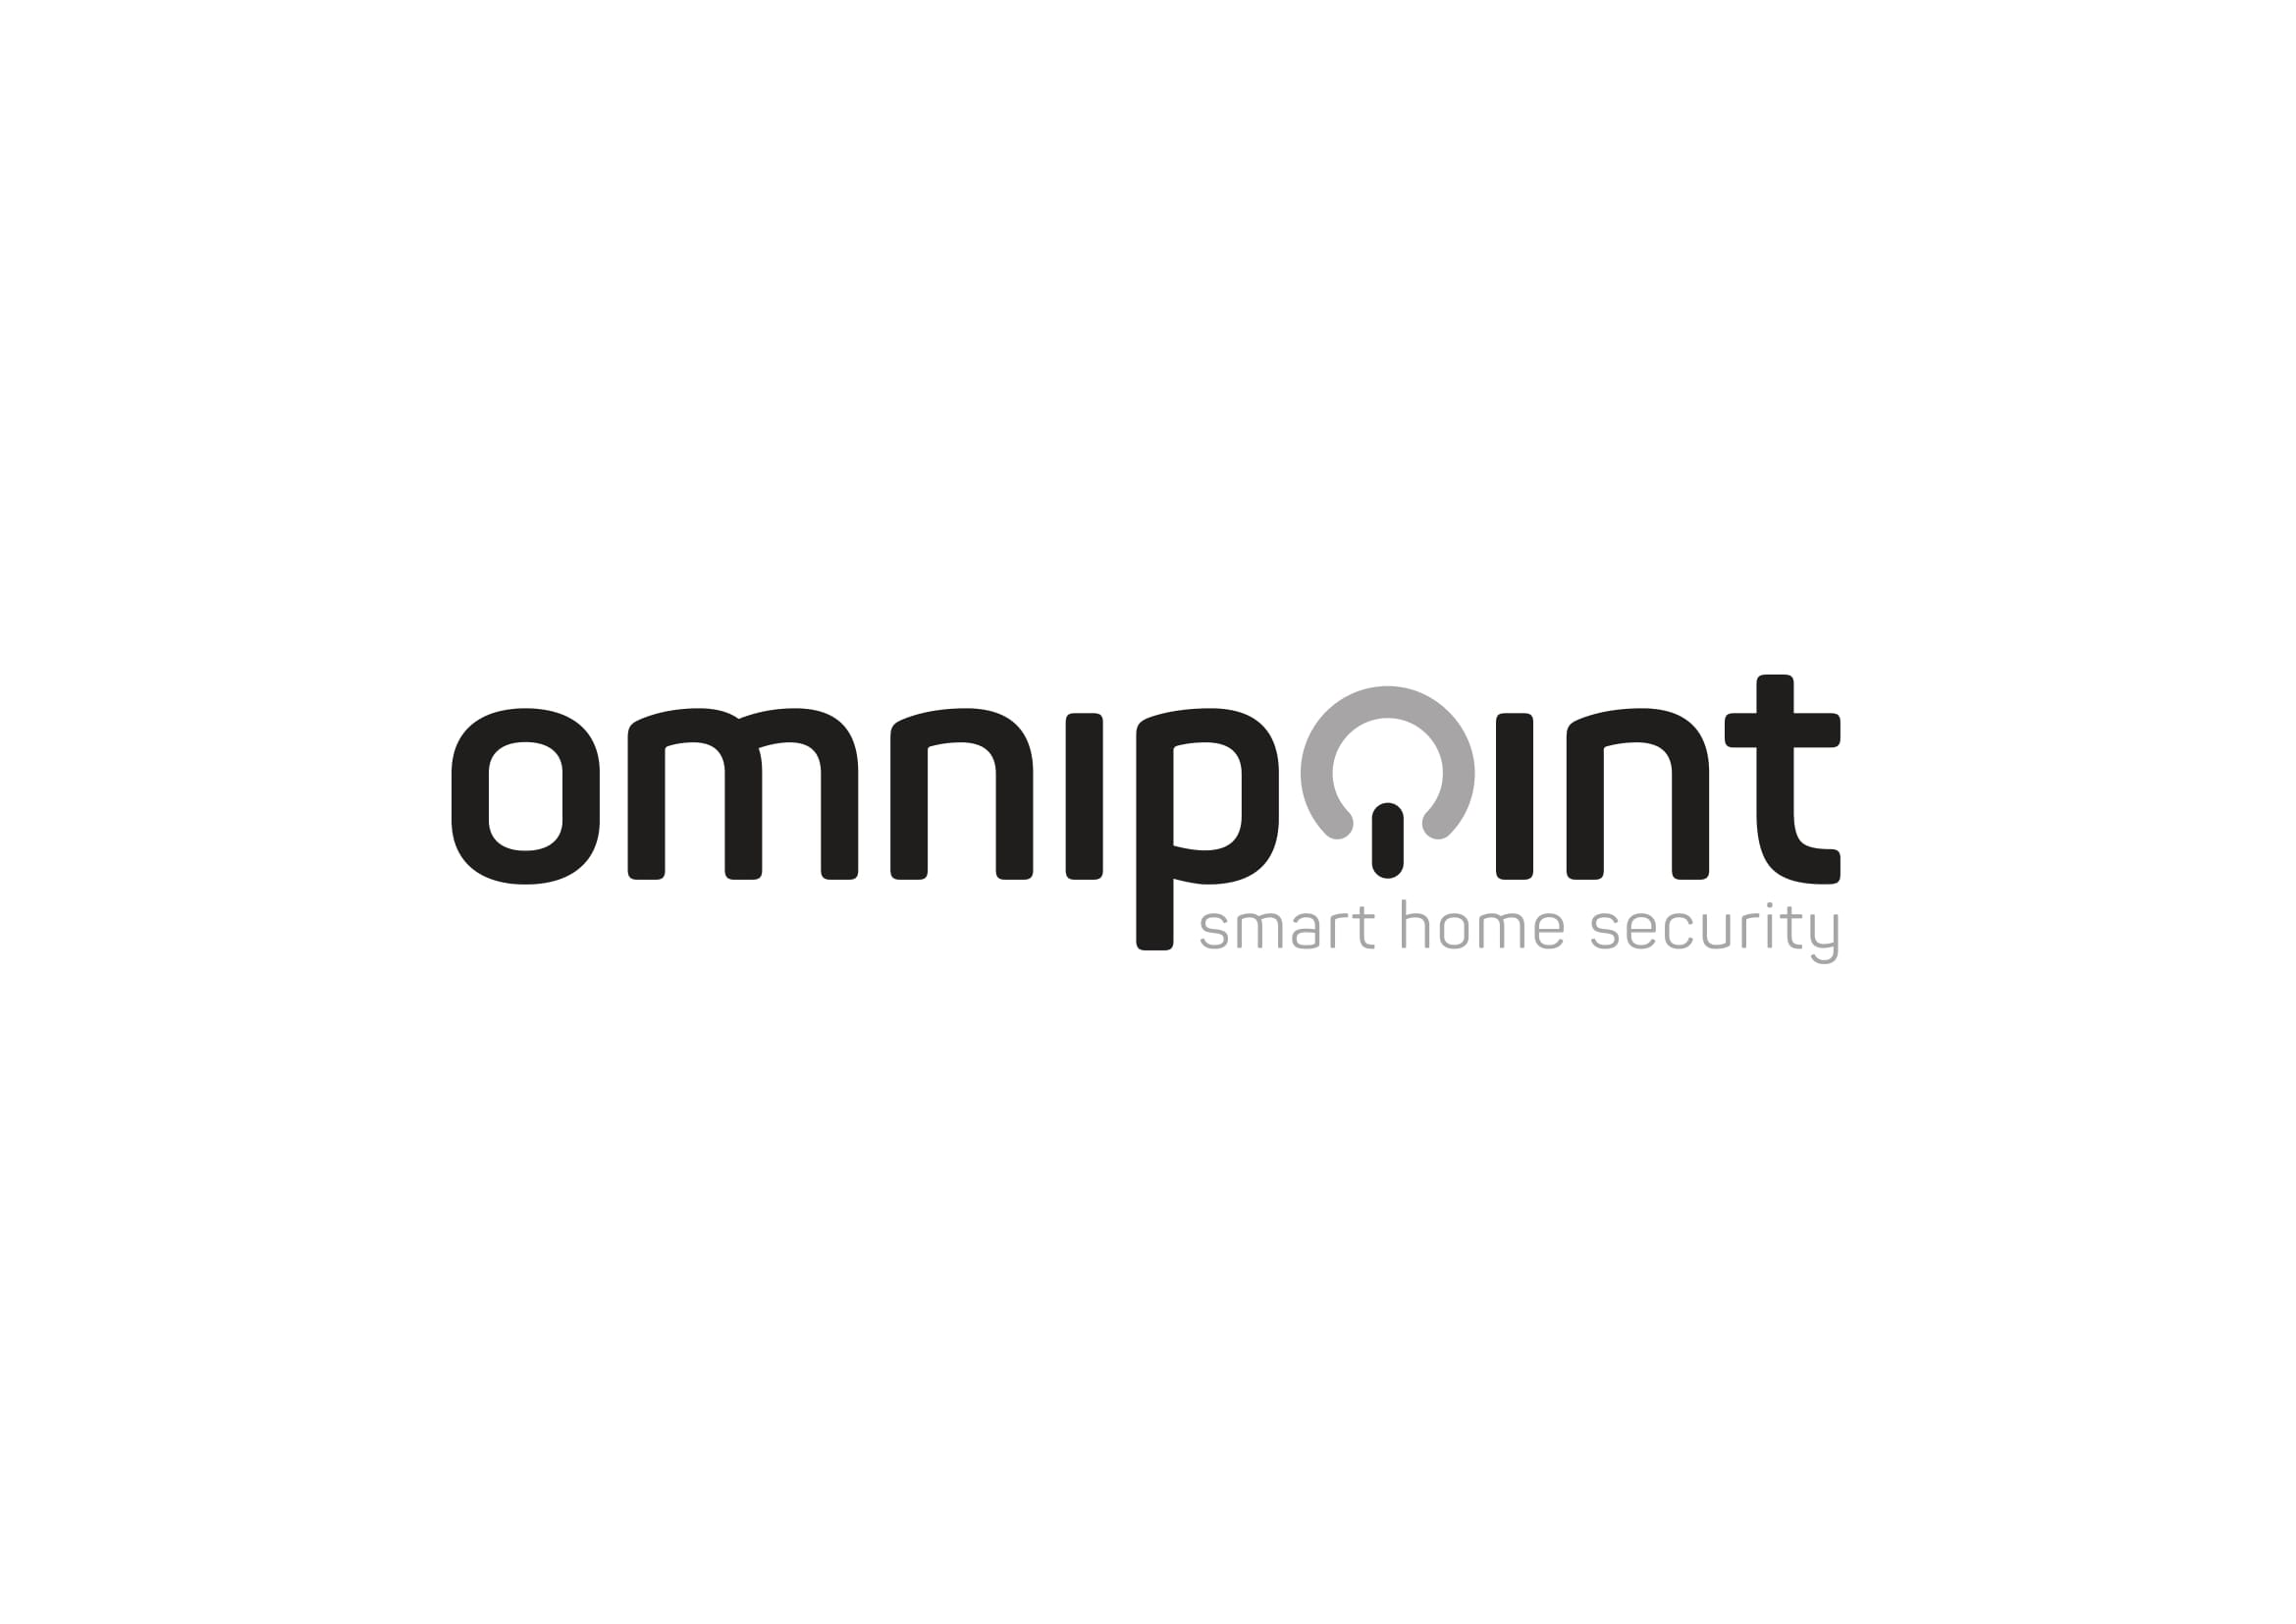 omnipoint smart home security